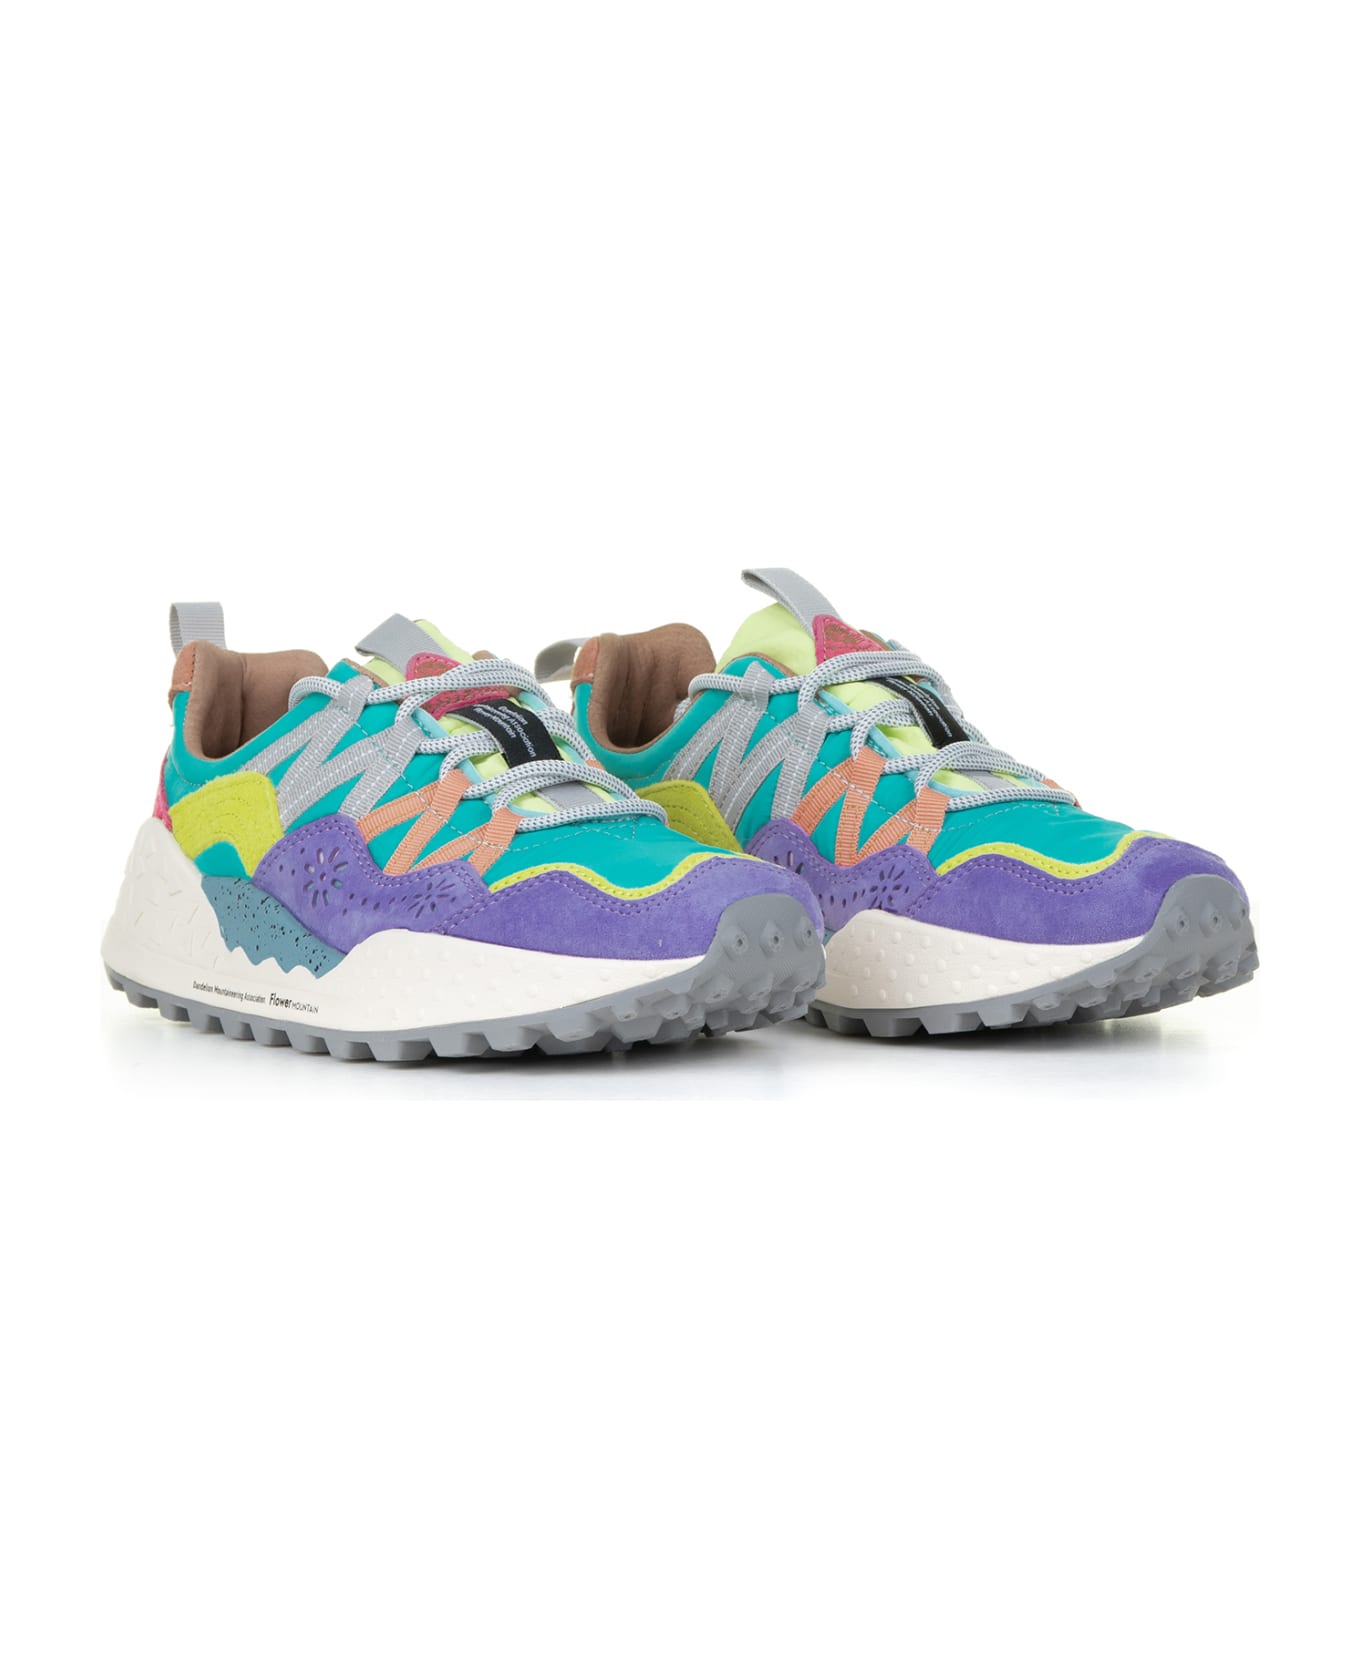 Flower Mountain Multicolored Washi Sneakers In Suede And Nylon - LILAC GREEN